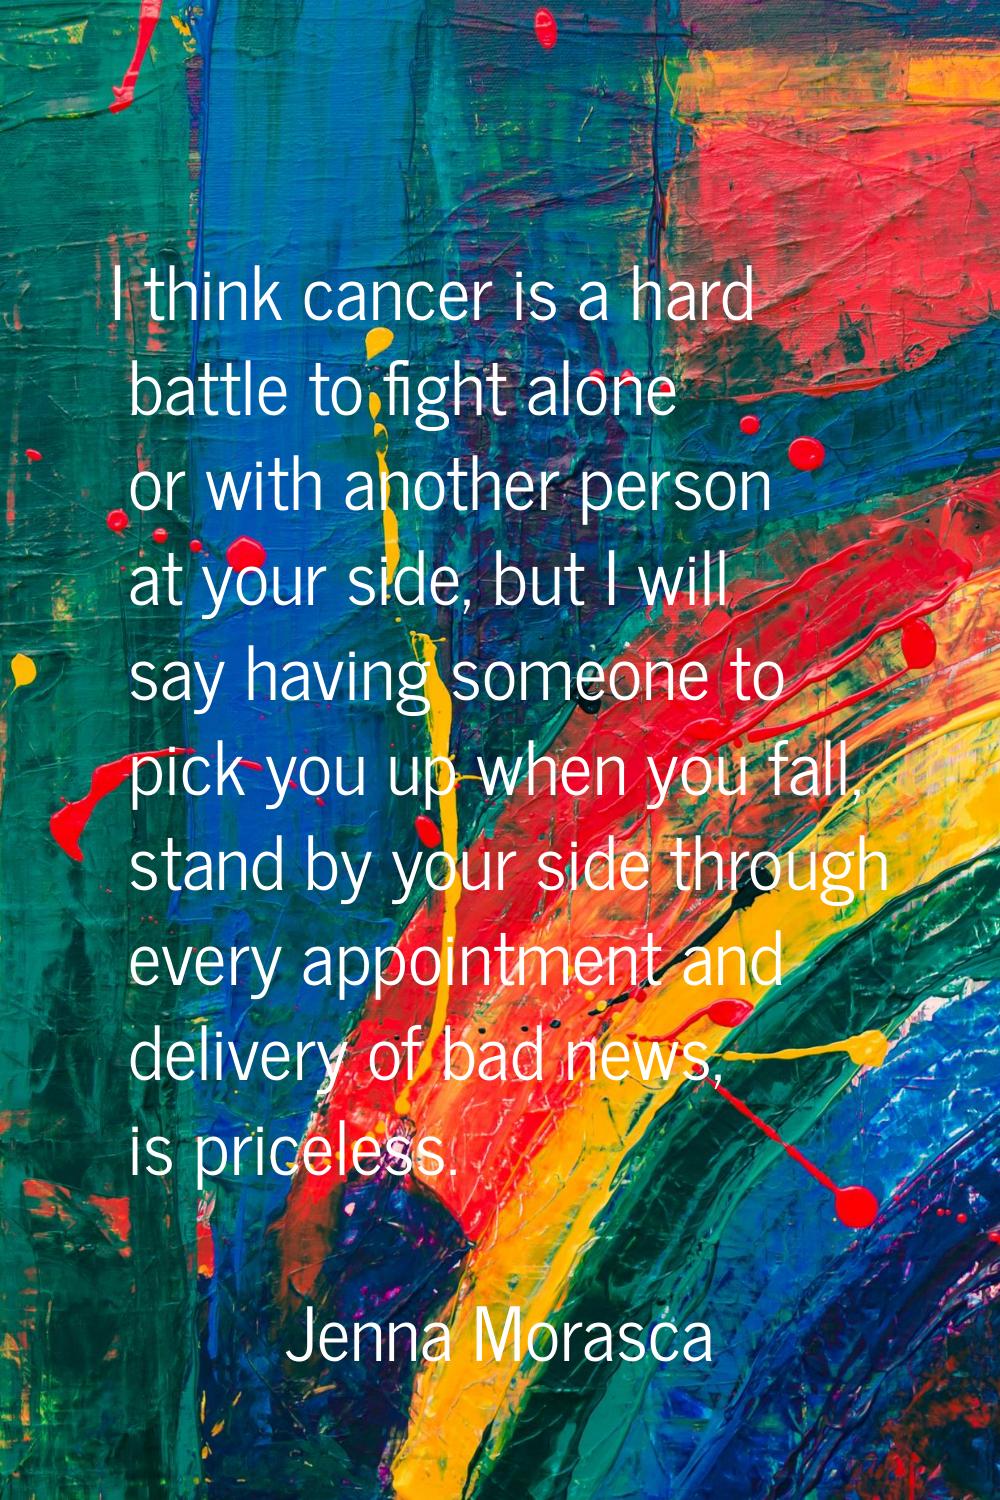 I think cancer is a hard battle to fight alone or with another person at your side, but I will say 